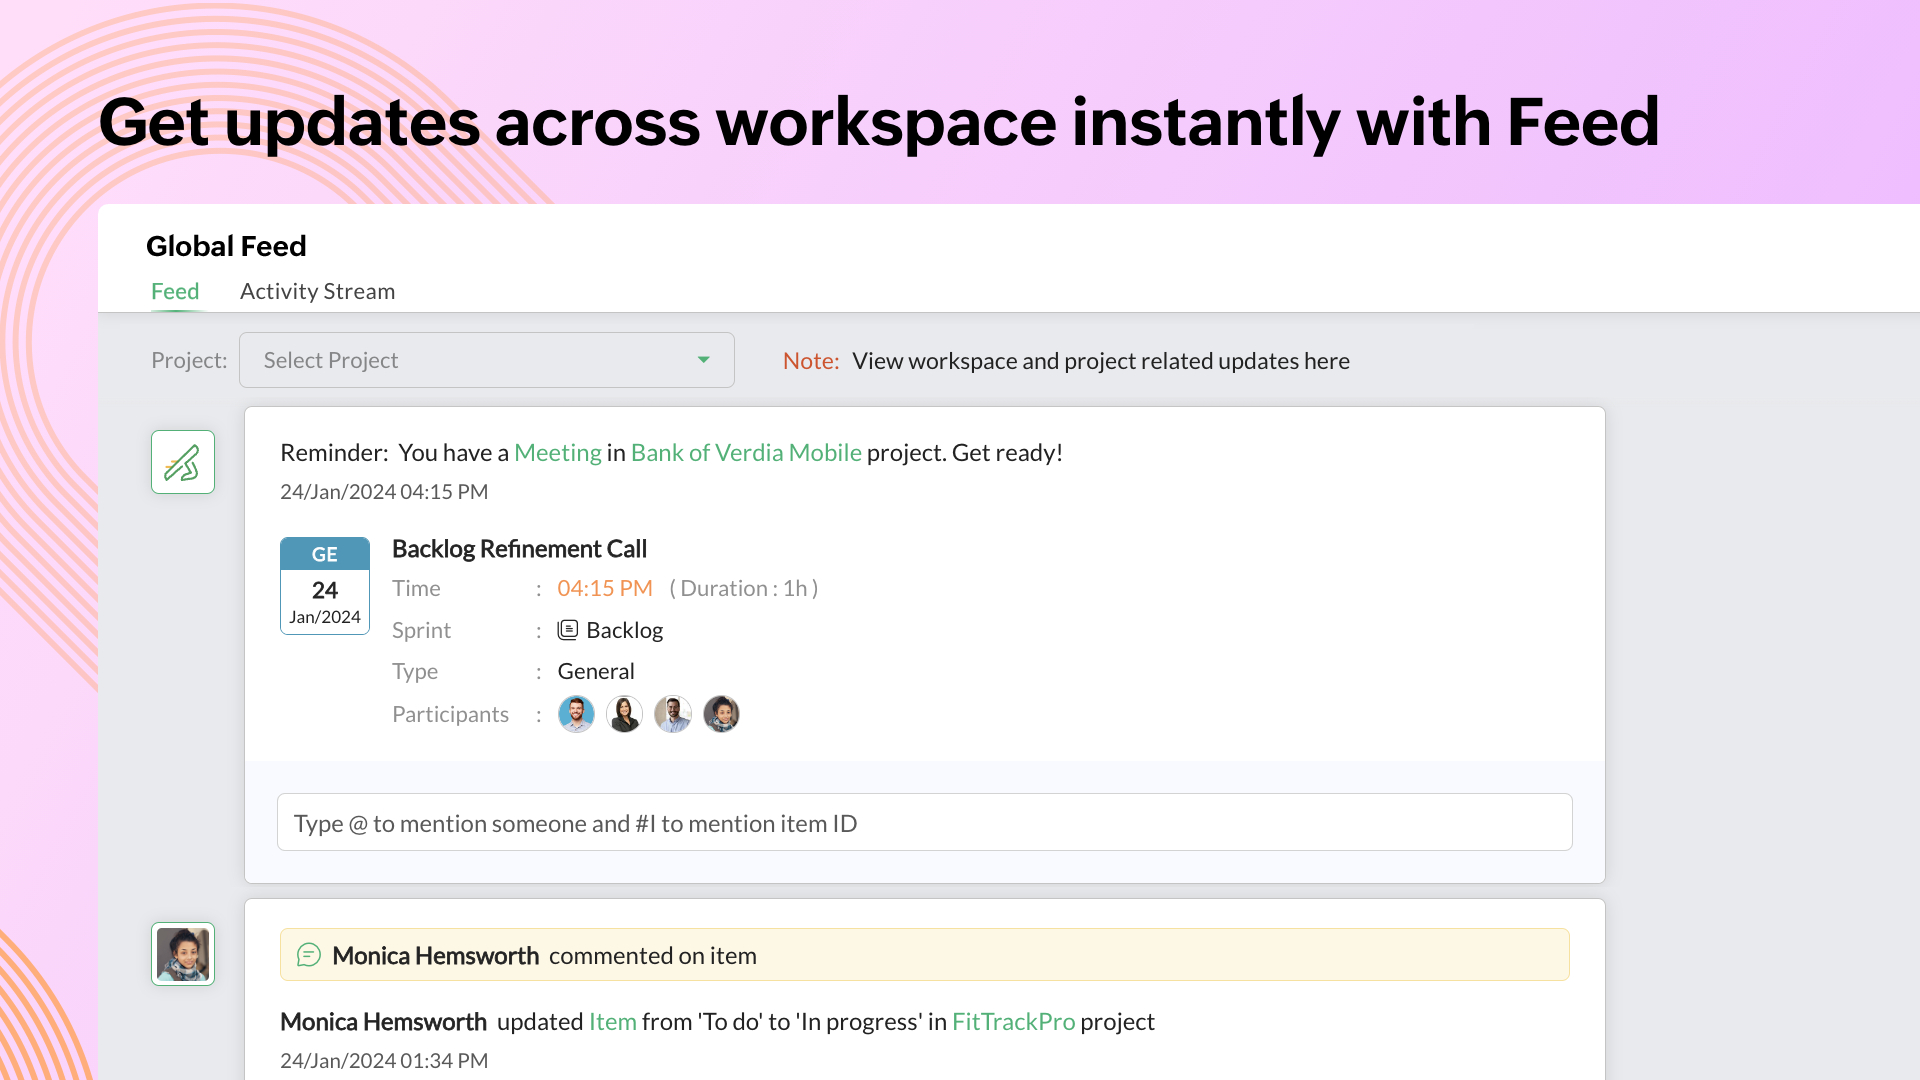 Get updates across workspace instantly with Feed